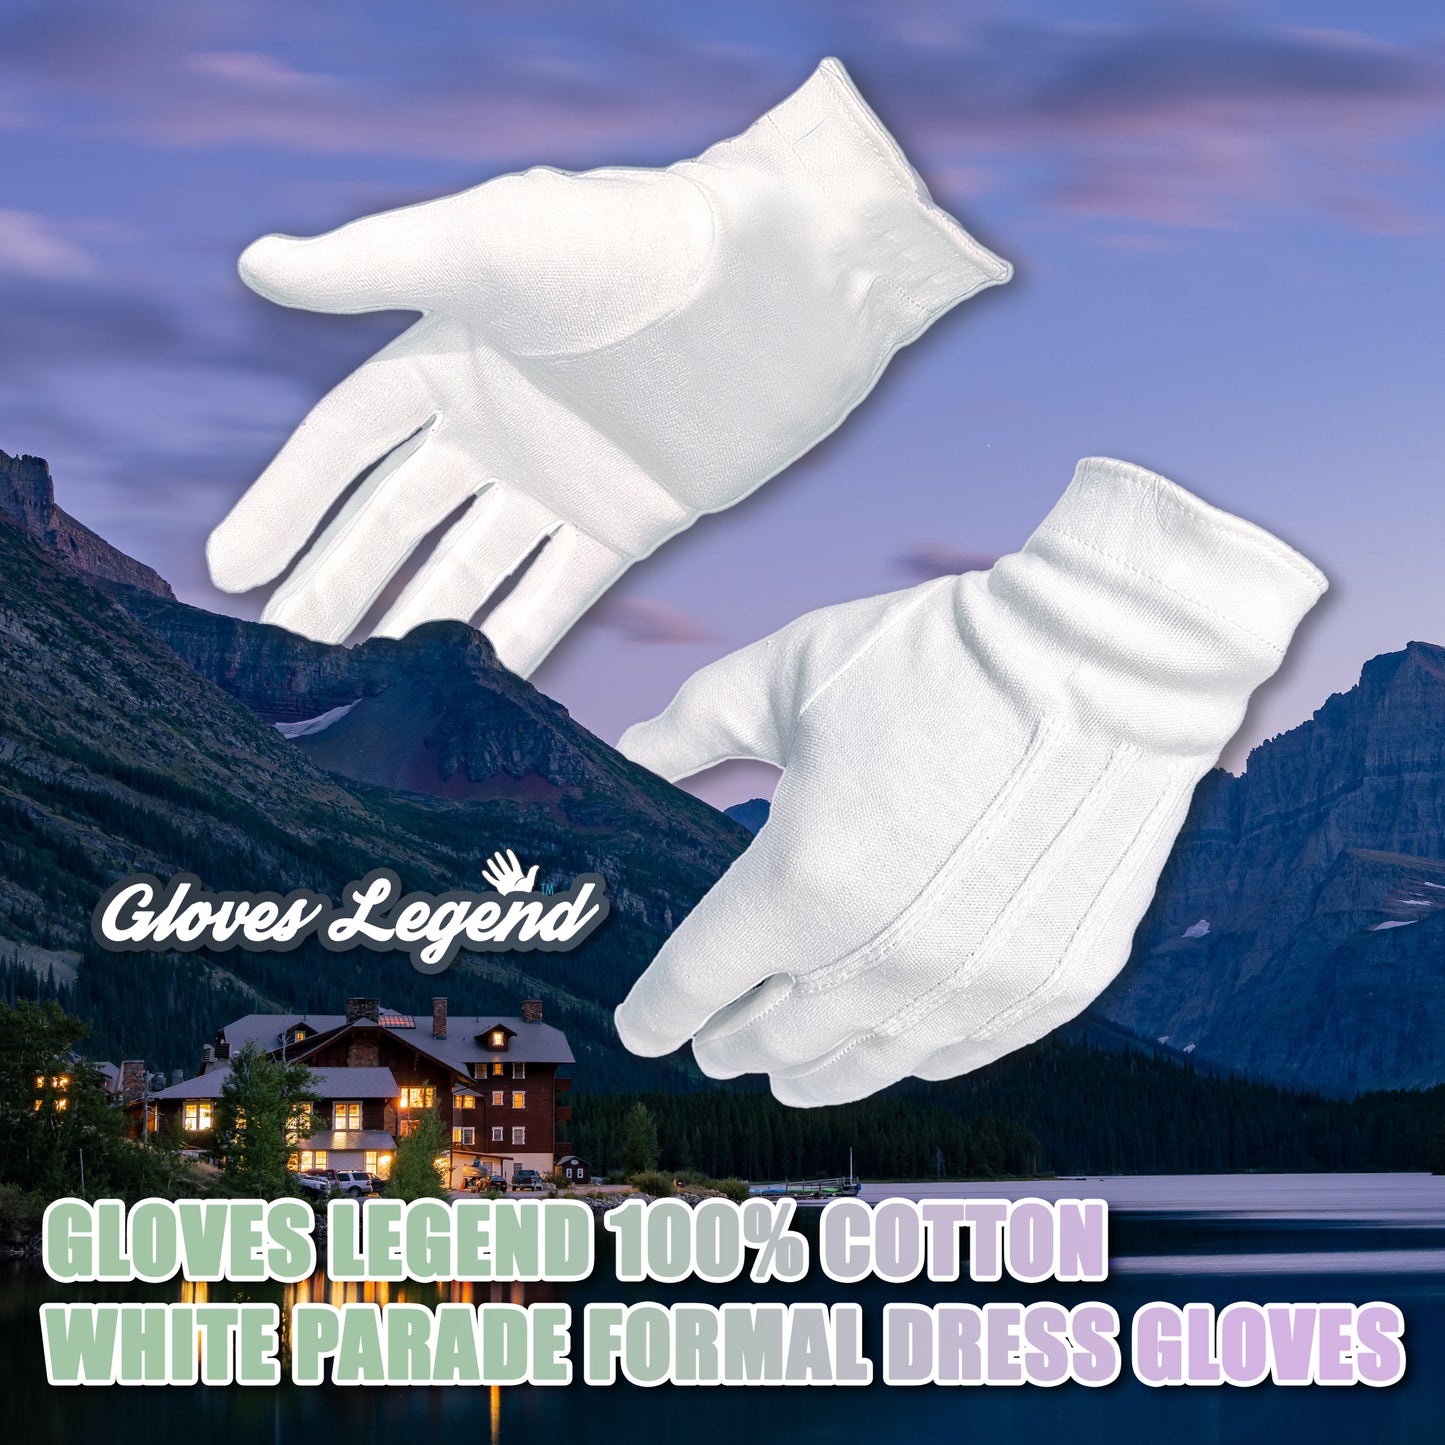 Extra-Large - 6 Pairs (12 Gloves) Gloves Legend 100% White Cotton Marching Parade Formal Dress Gloves